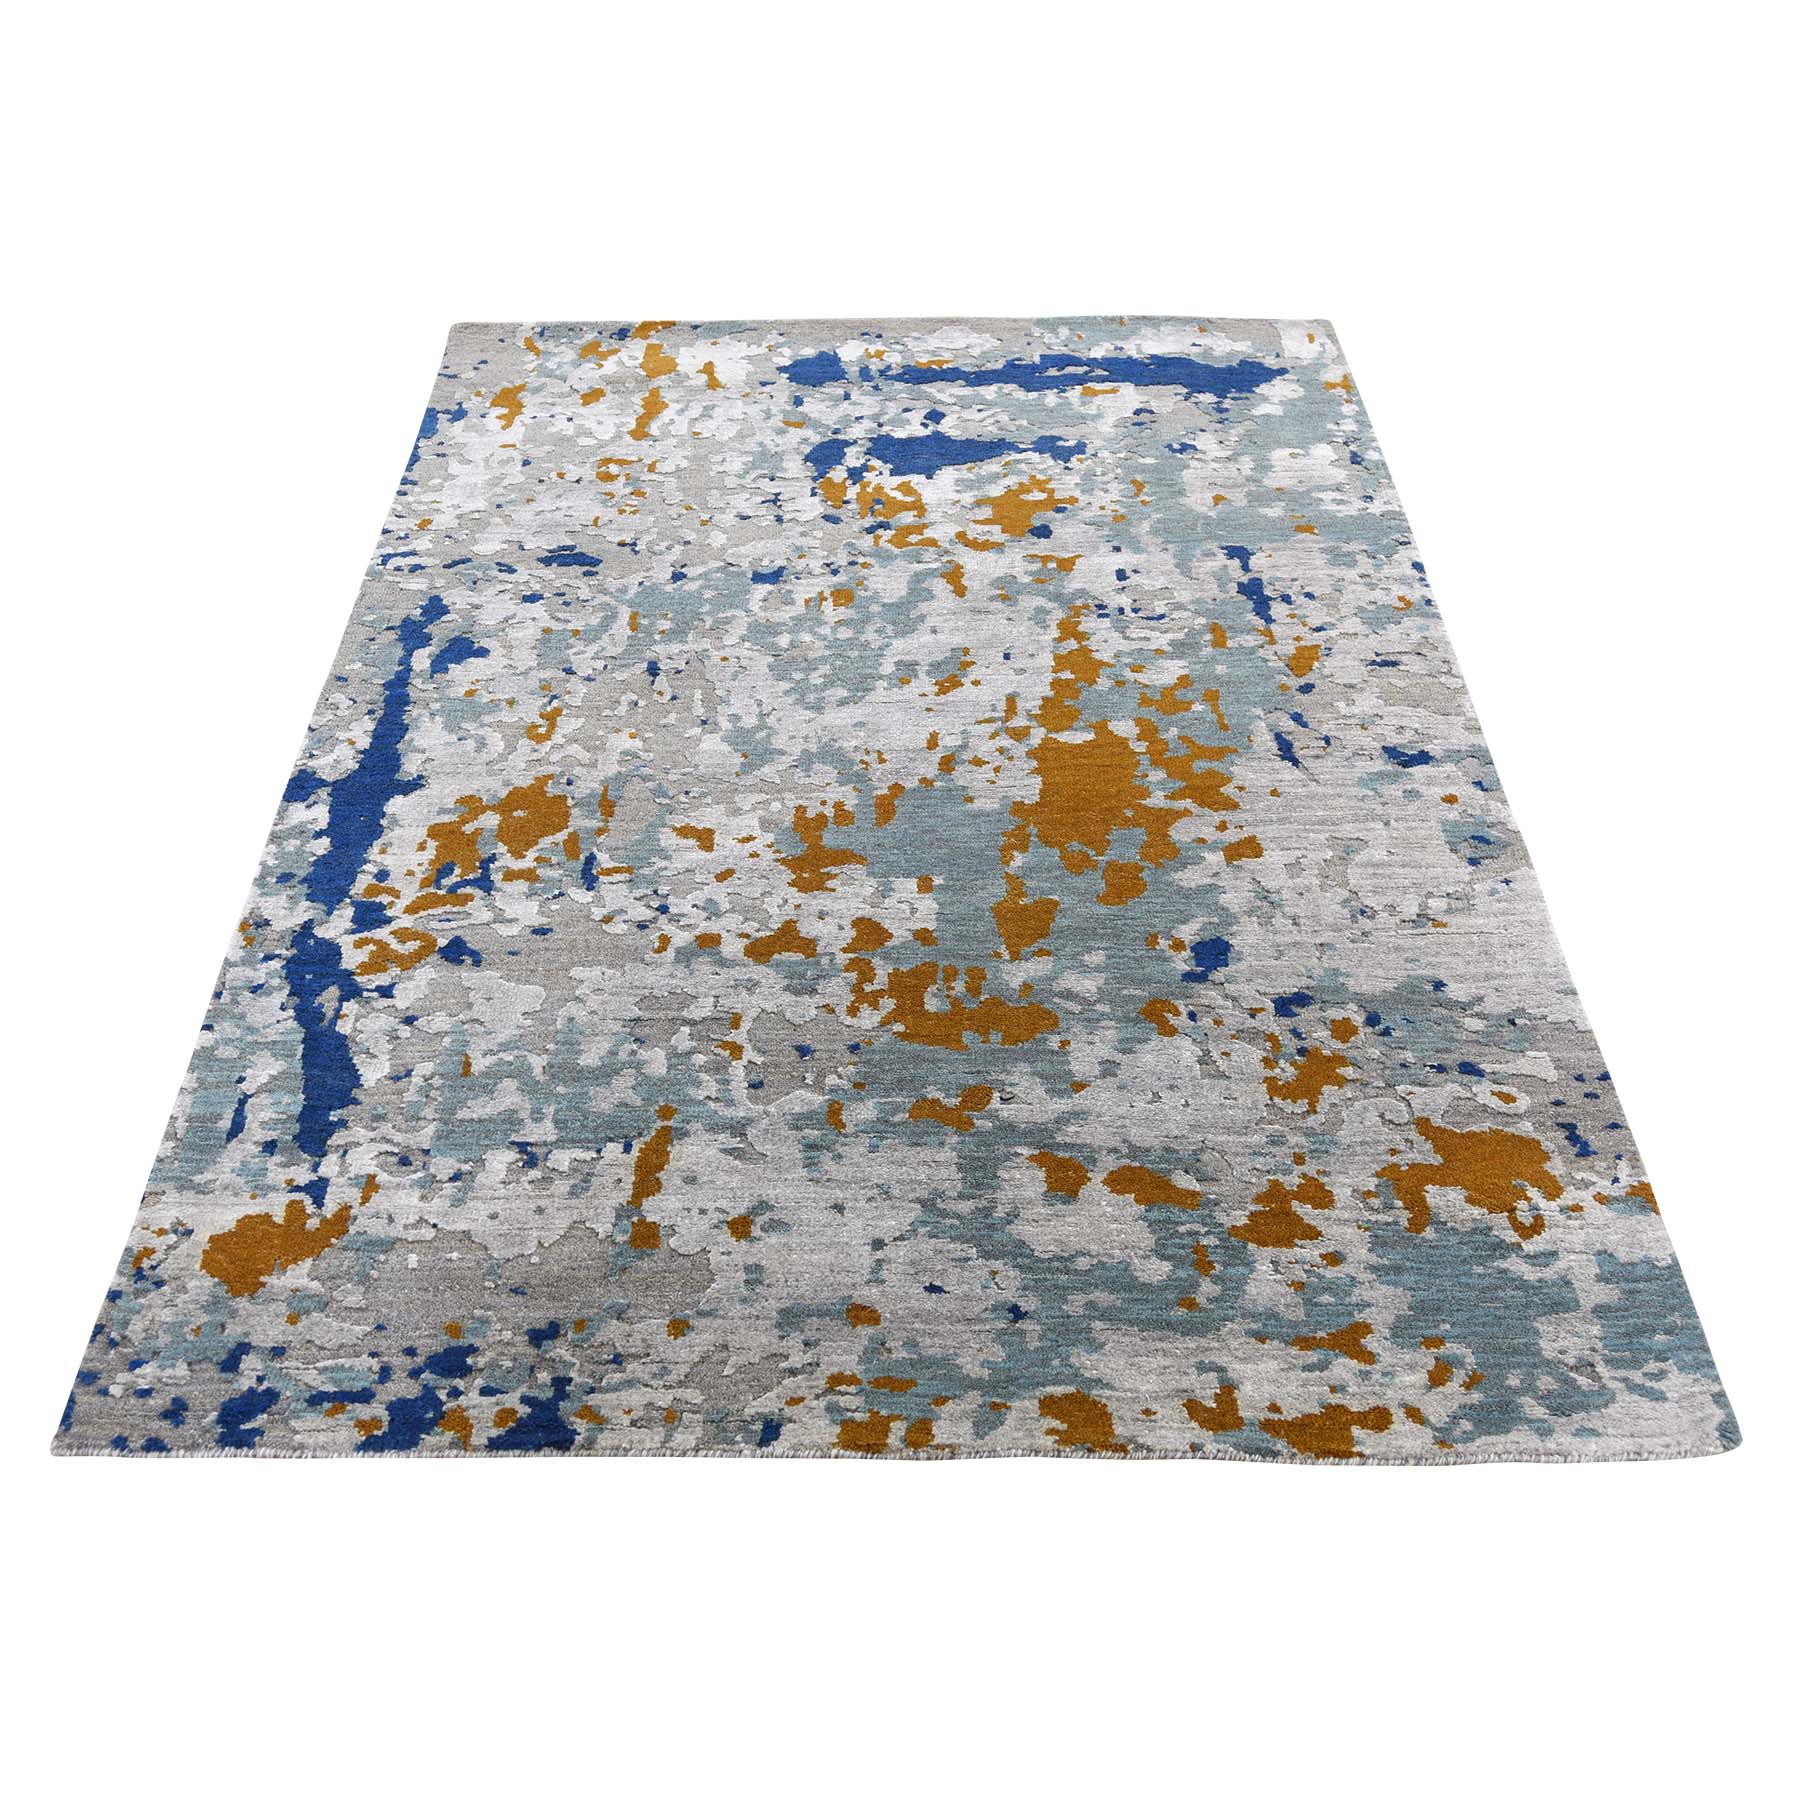 3'10"x5'10" Hi-Low Pile Abstract Design Wool And Silk Runner Hand Woven Modern Rug 